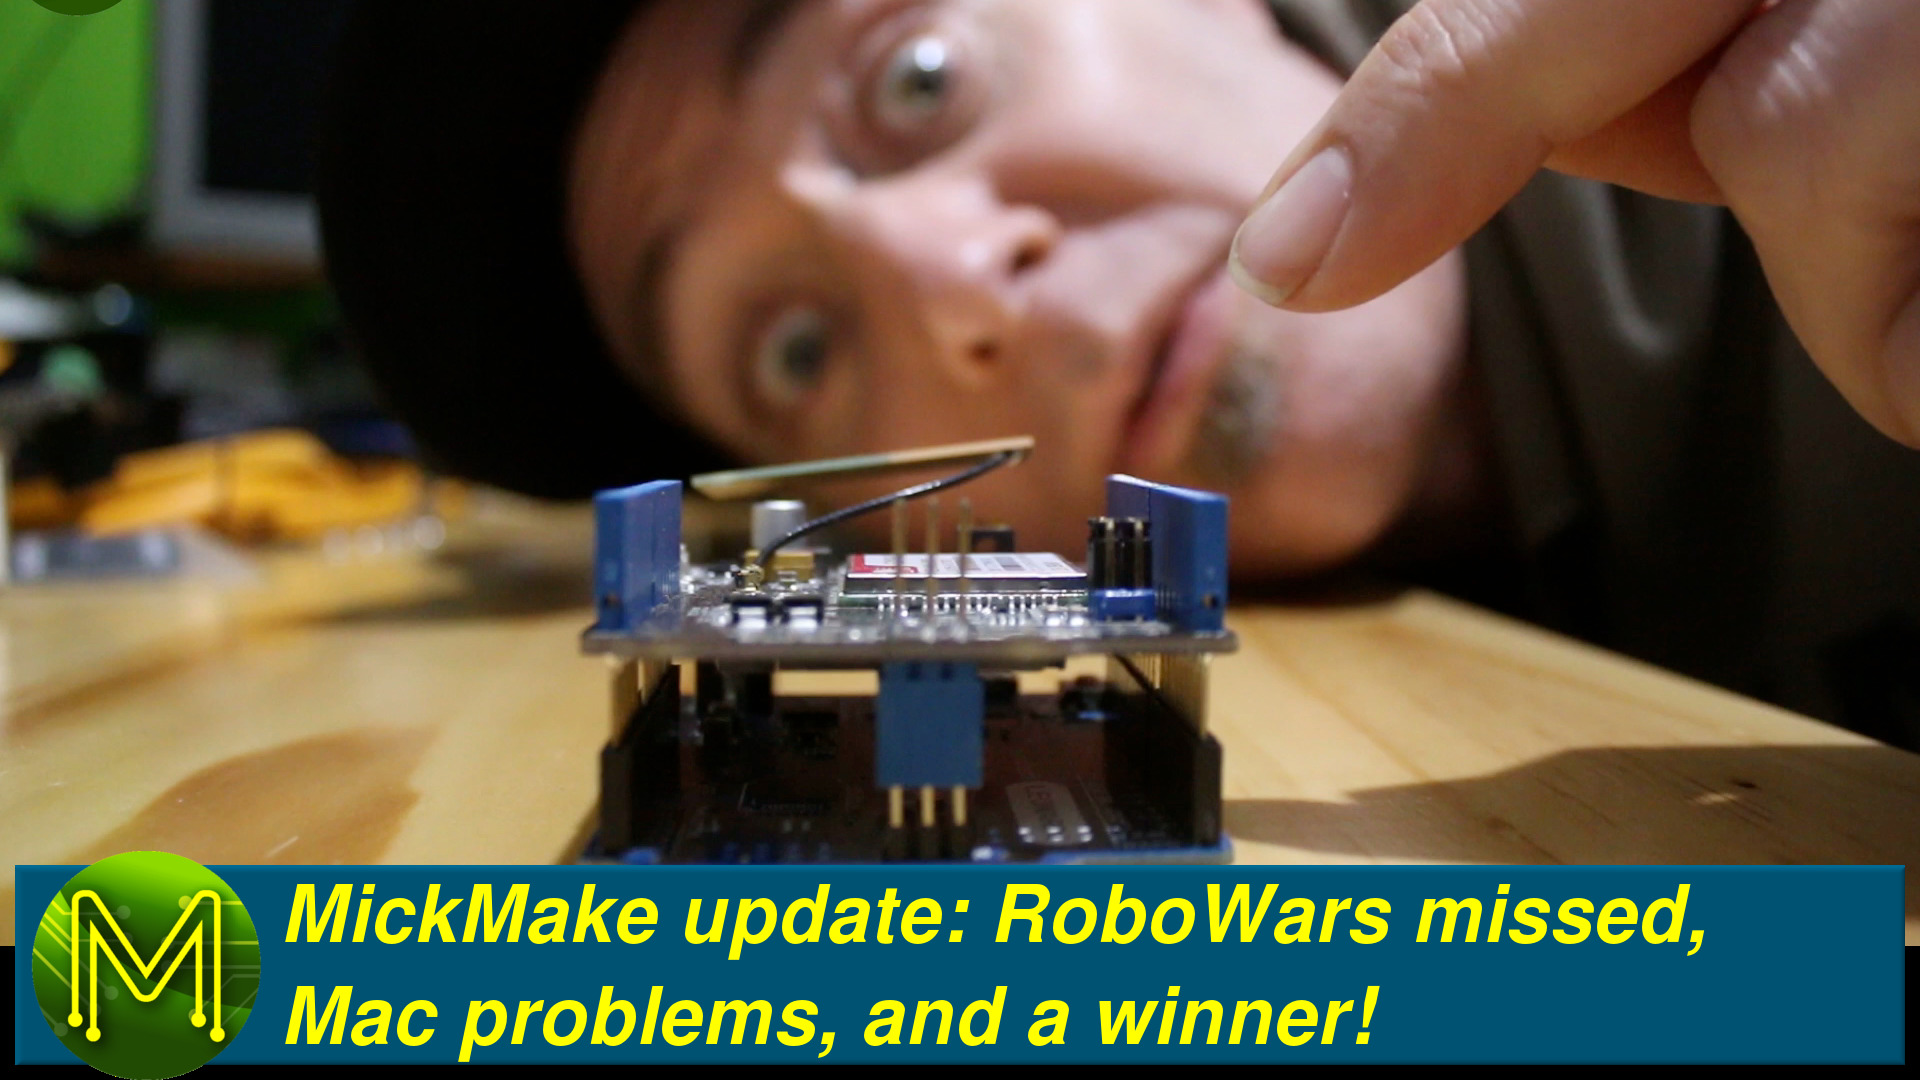 MickMake Update #02: Robowars missed, Mac problems and a winner!